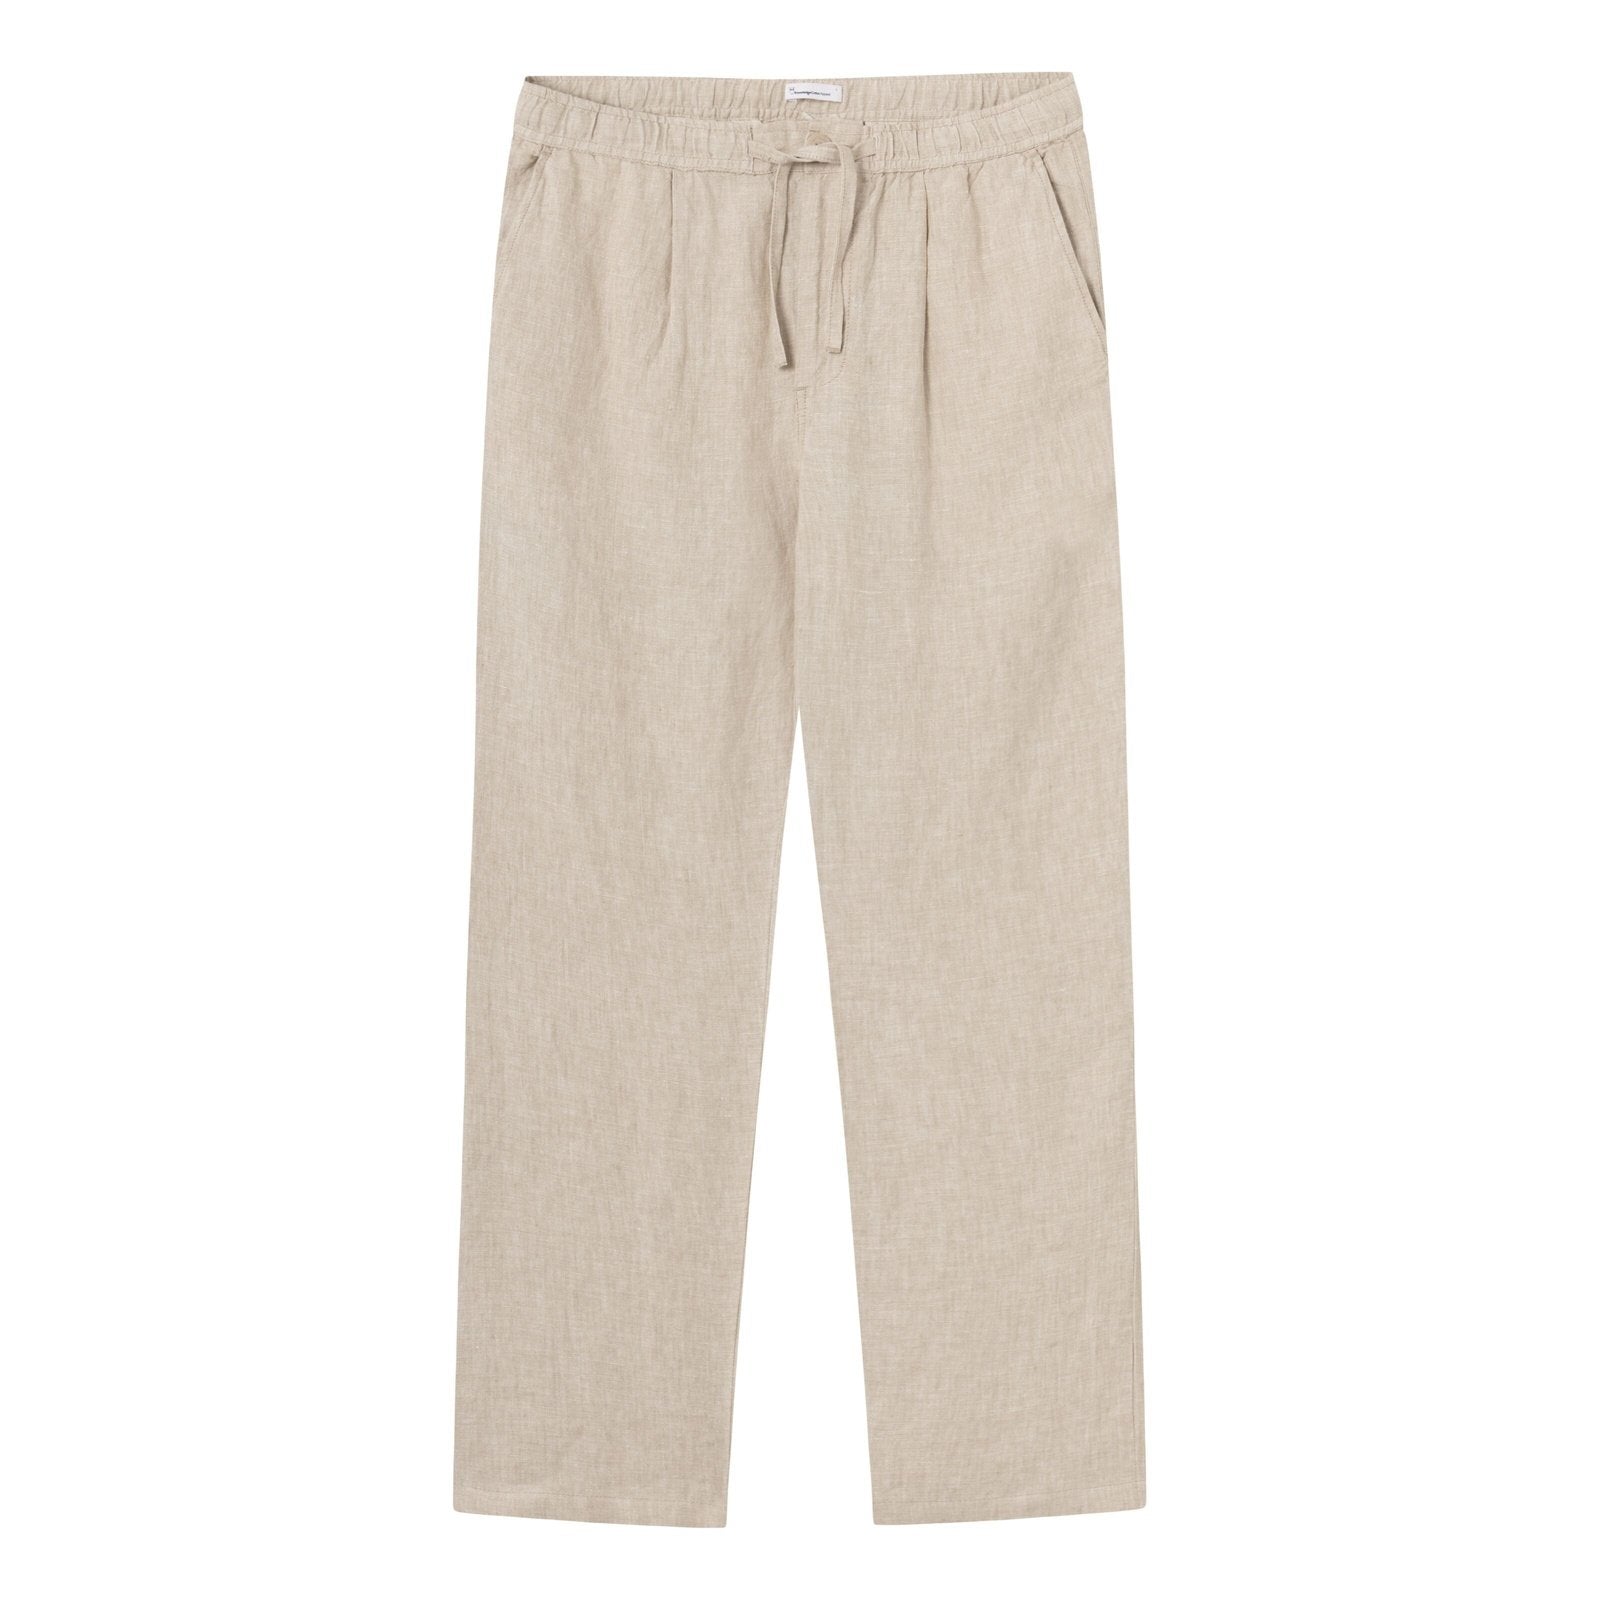 Knowledge Cotton Apparel M FIG Loose Linen Pants Light Feather Gray